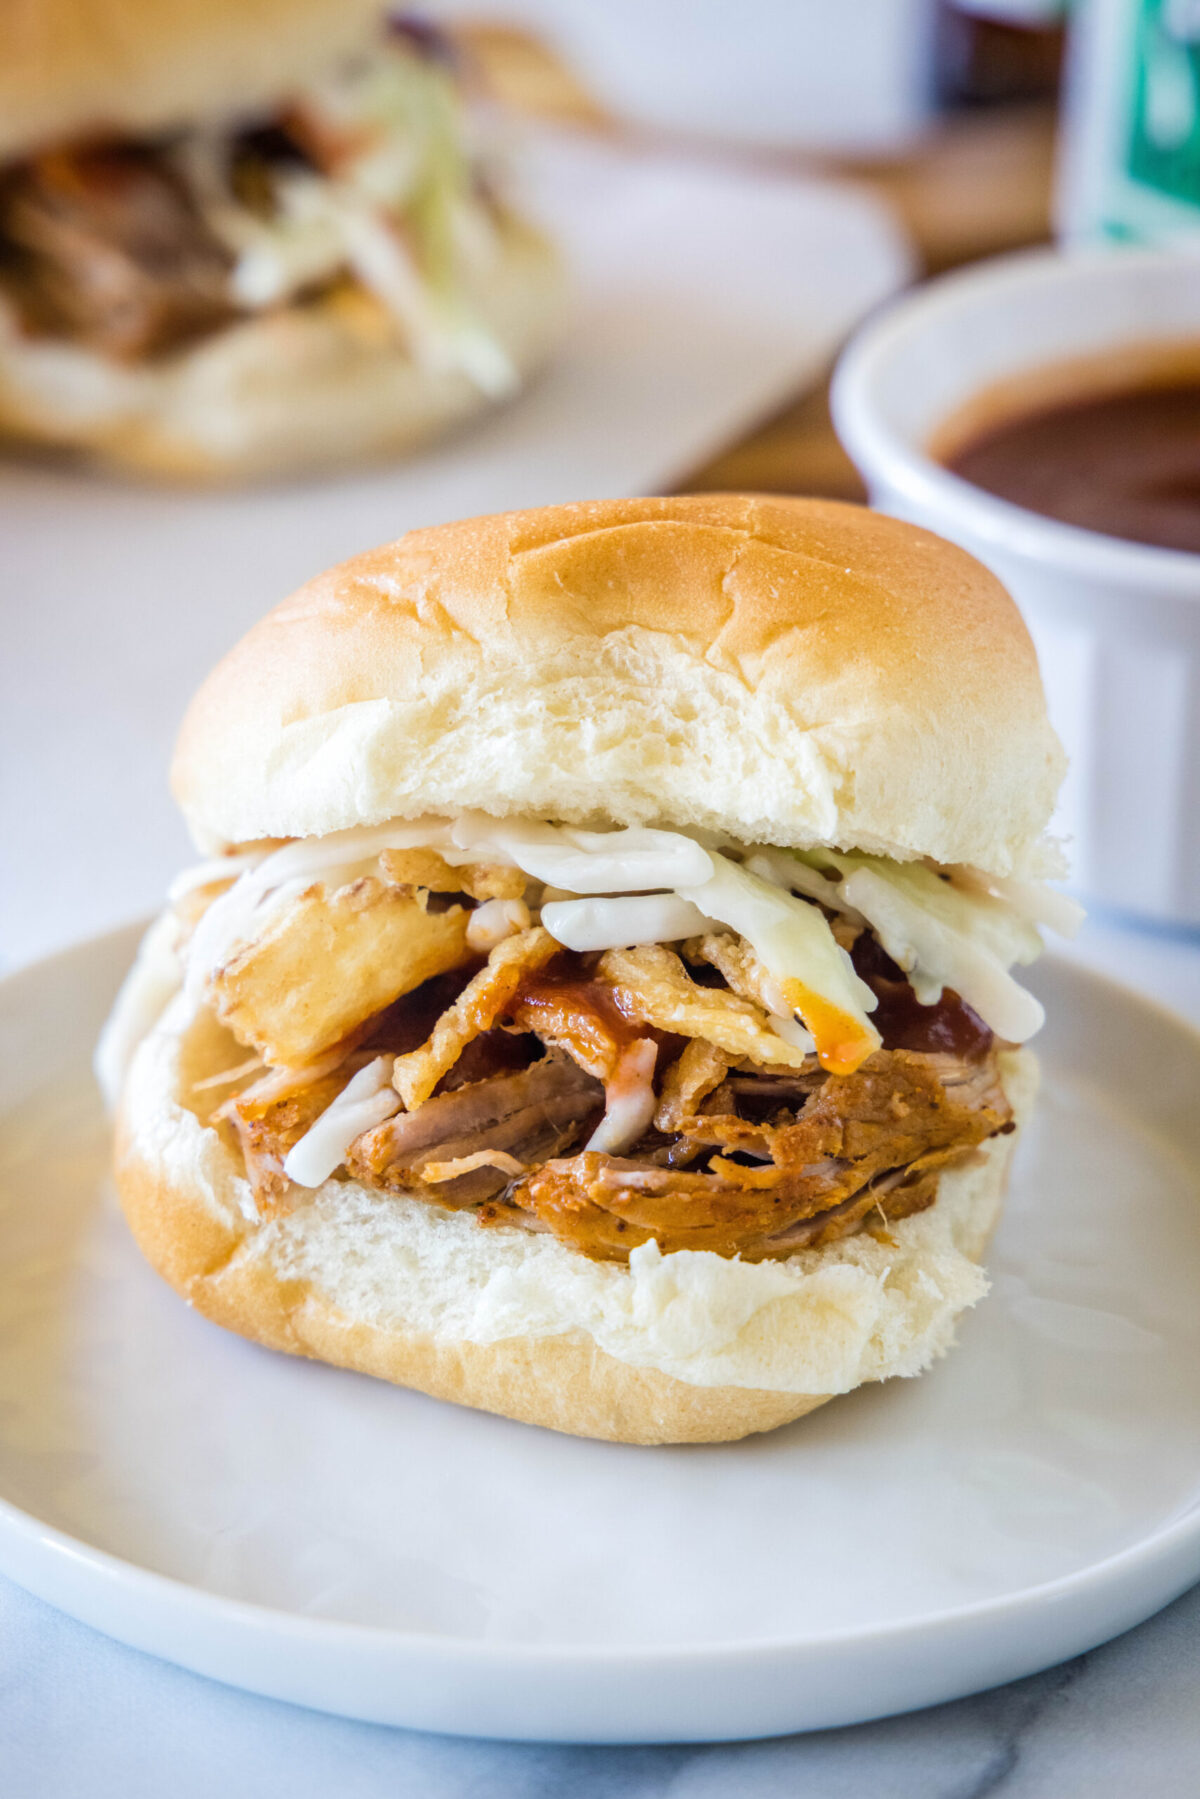 A pulled pork slider with coleslaw on a plate, with another one in the background.